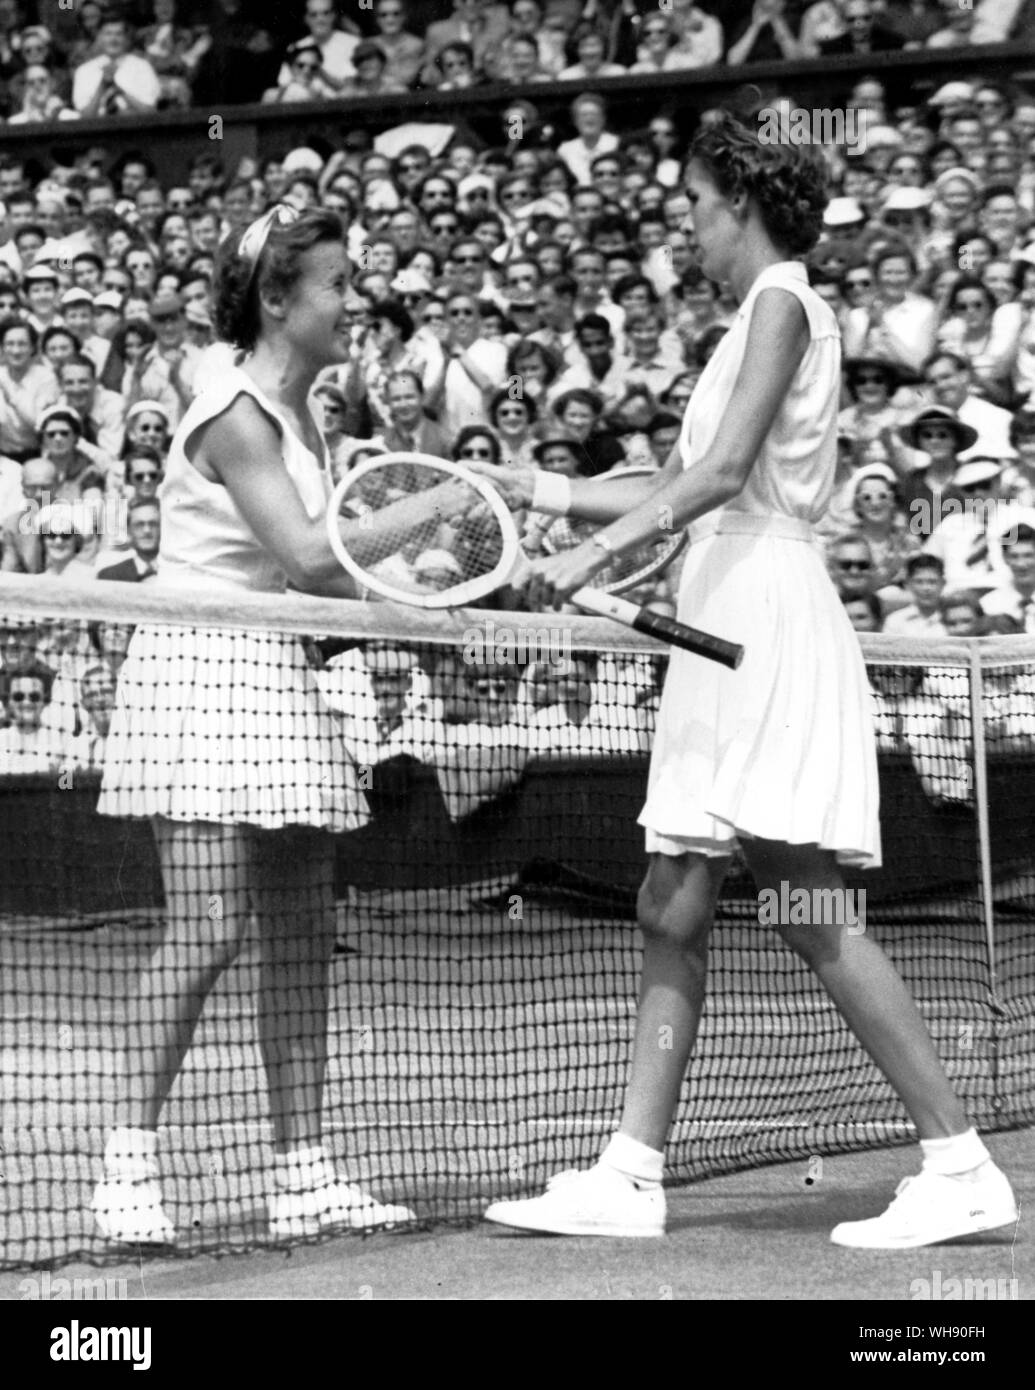 Maureen 'Little Mo' Connolly shakes hands with Doris Hart, after defeating her in the 1953 Wimbledon singles final.. Stock Photo